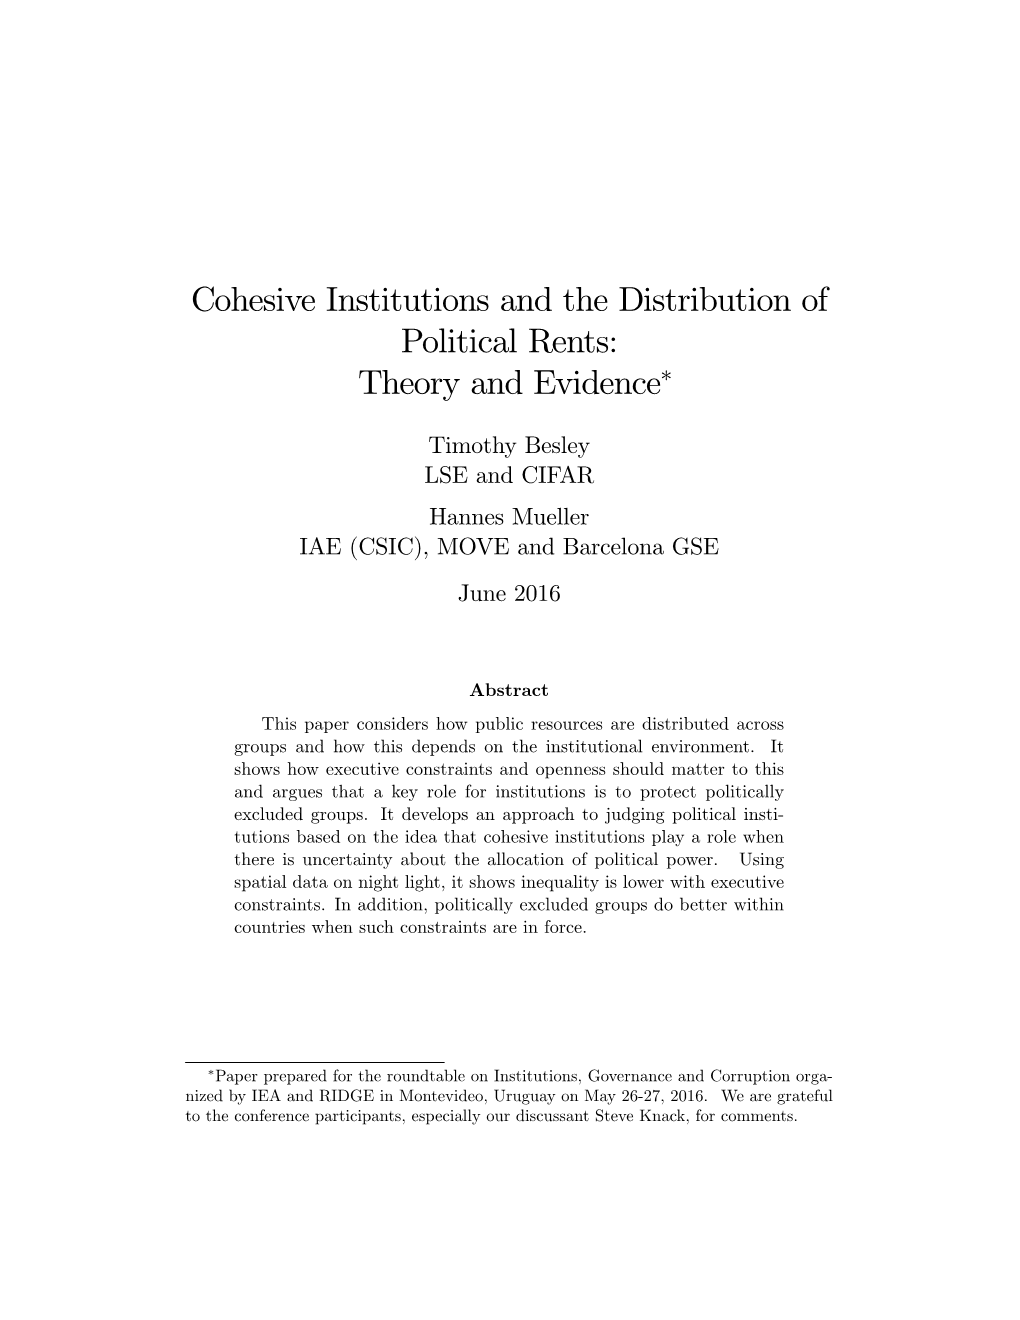 Cohesive Institutions and the Distribution of Political Rents: Theory and Evidence∗